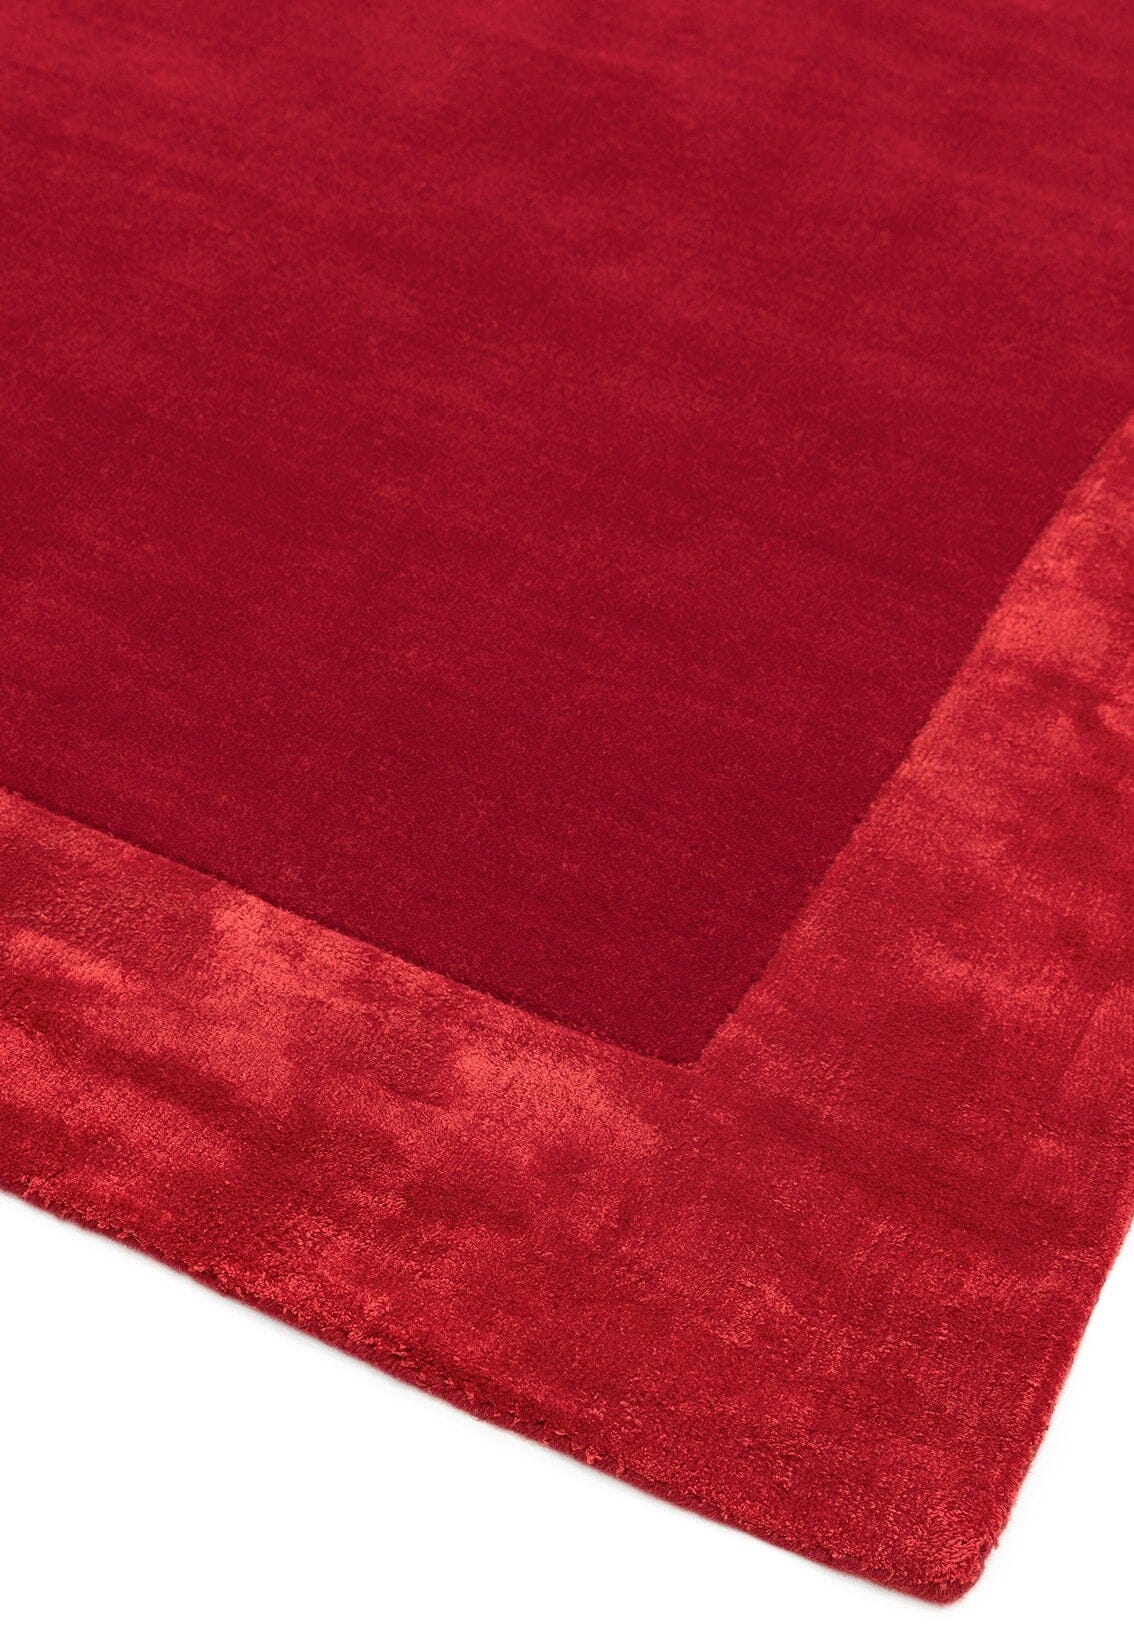  Asiatic Carpets-Asiatic Carpets Ascot Hand Woven Rug Red - 200 x 290cm-Red 101 